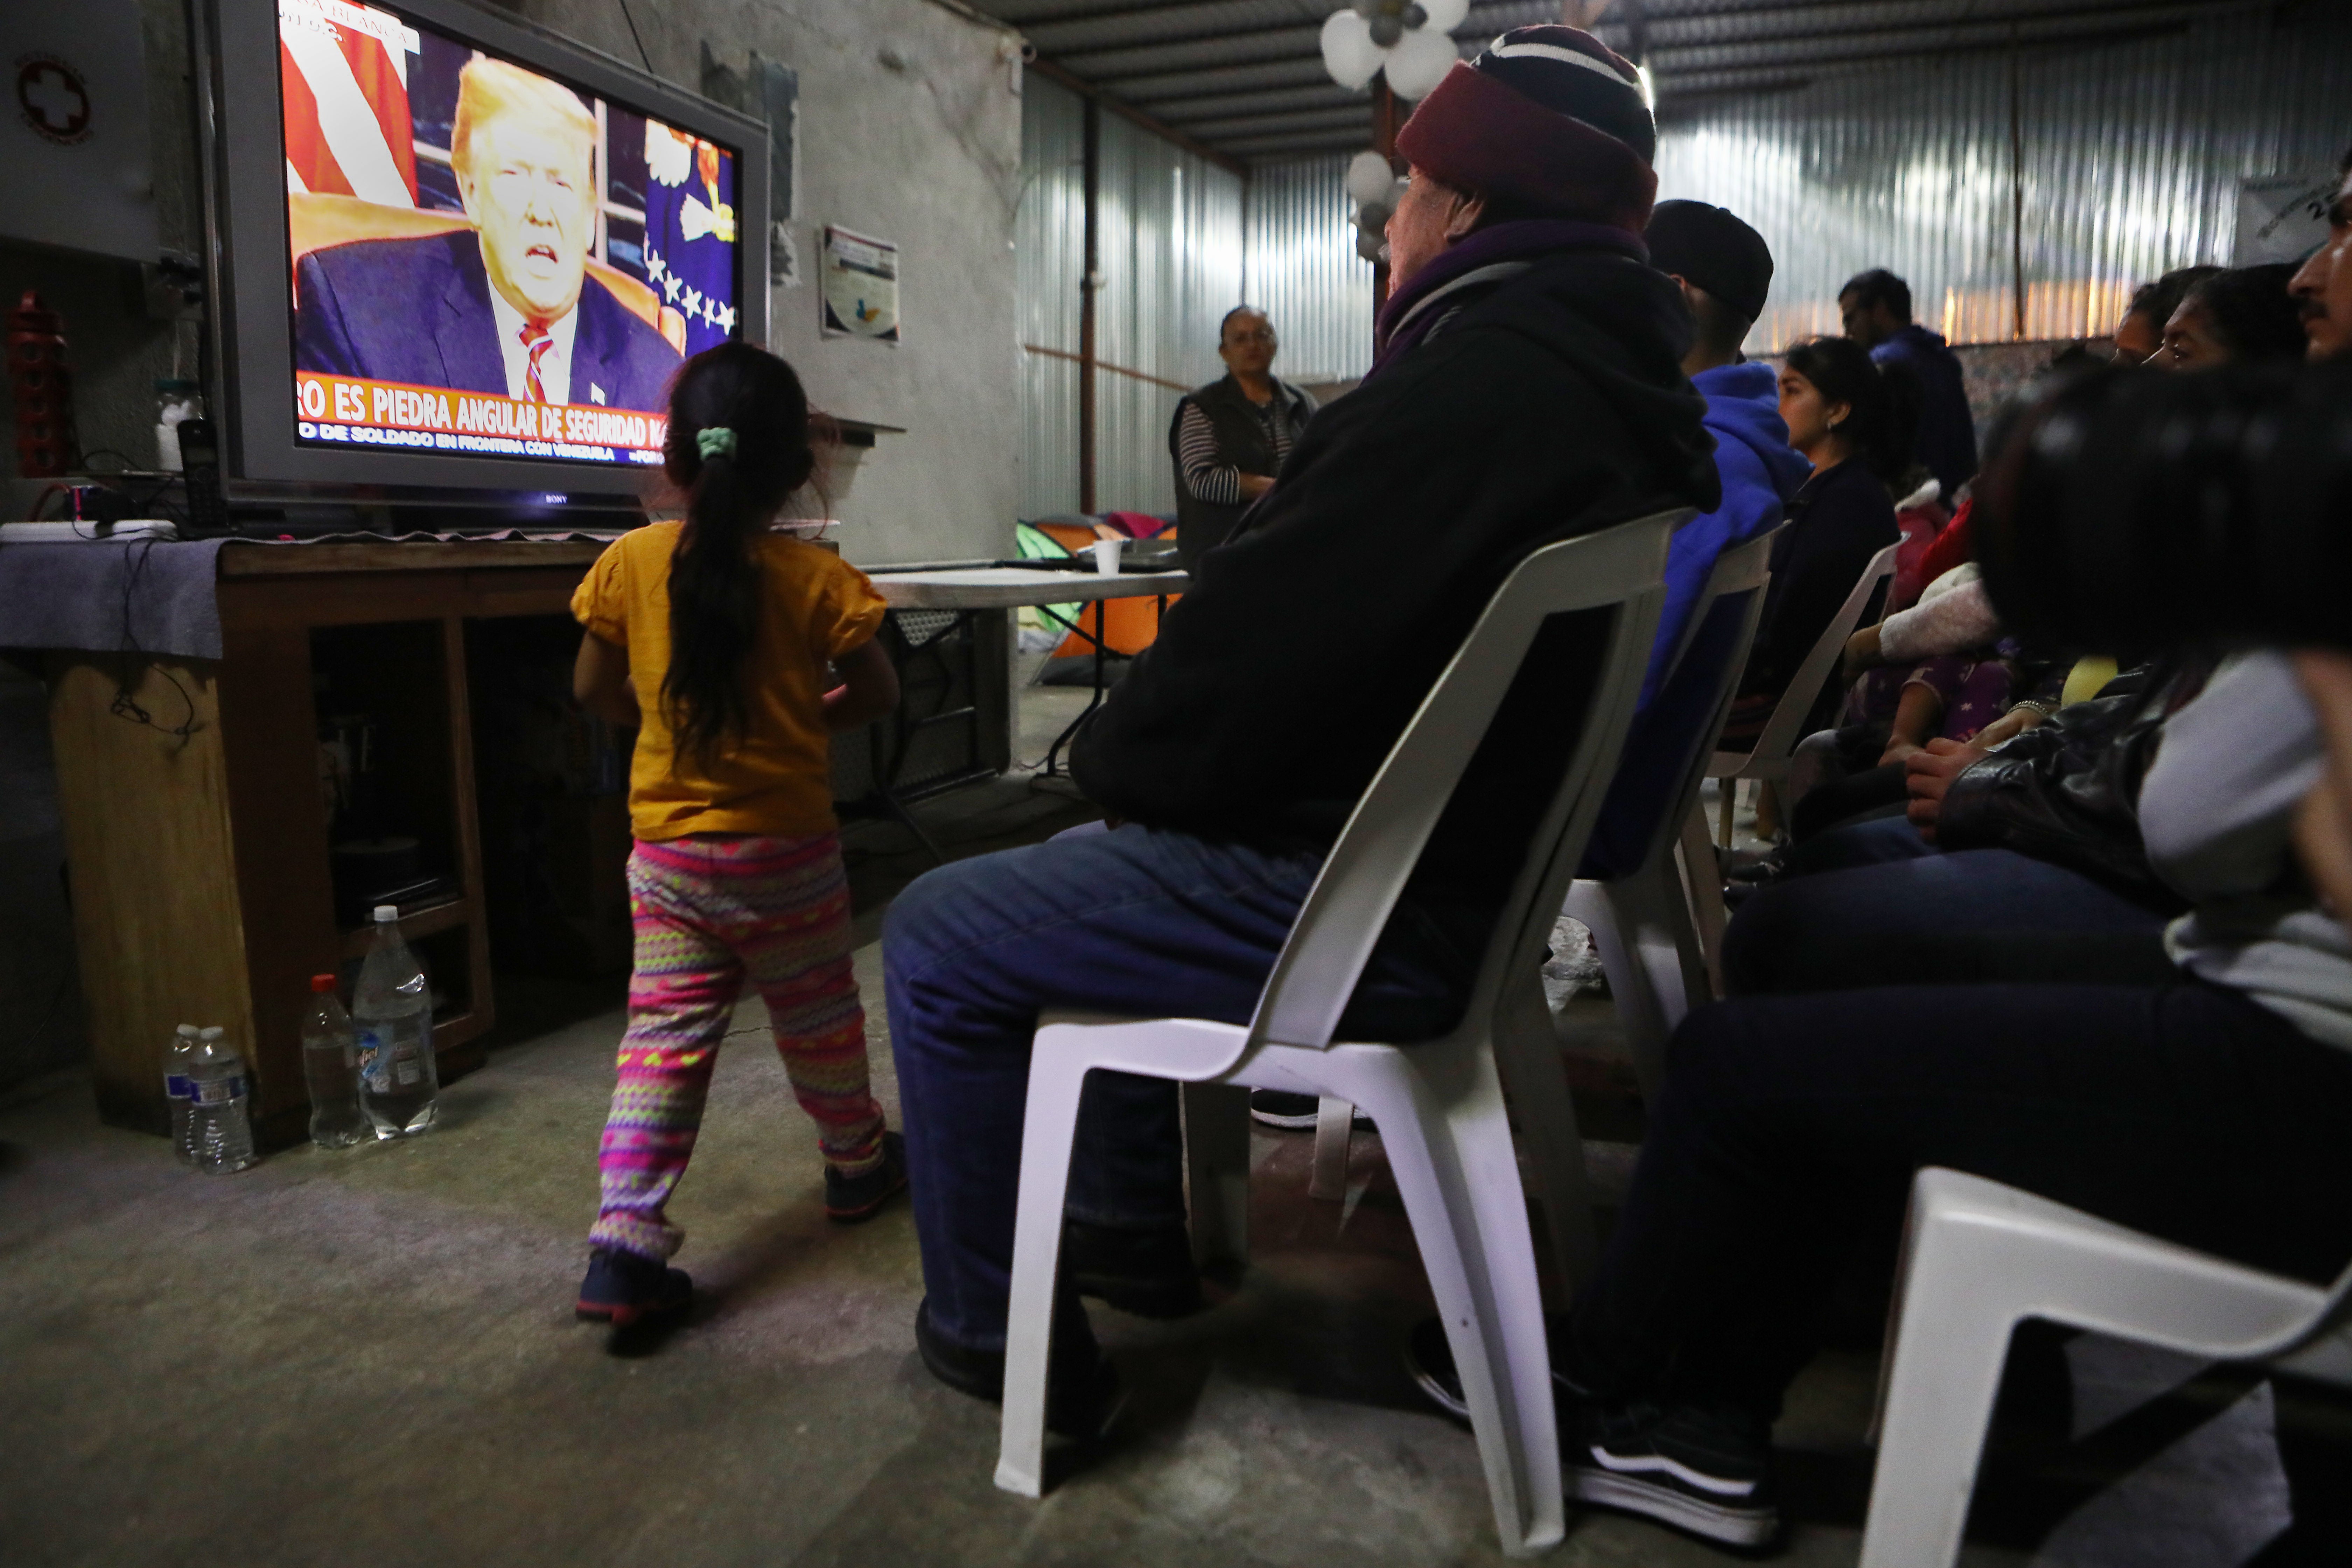 Migrants view a live televised speech by President Donald Trump on border security at a shelter for migrants on January 8, 2019 in Tijuana, Mexico